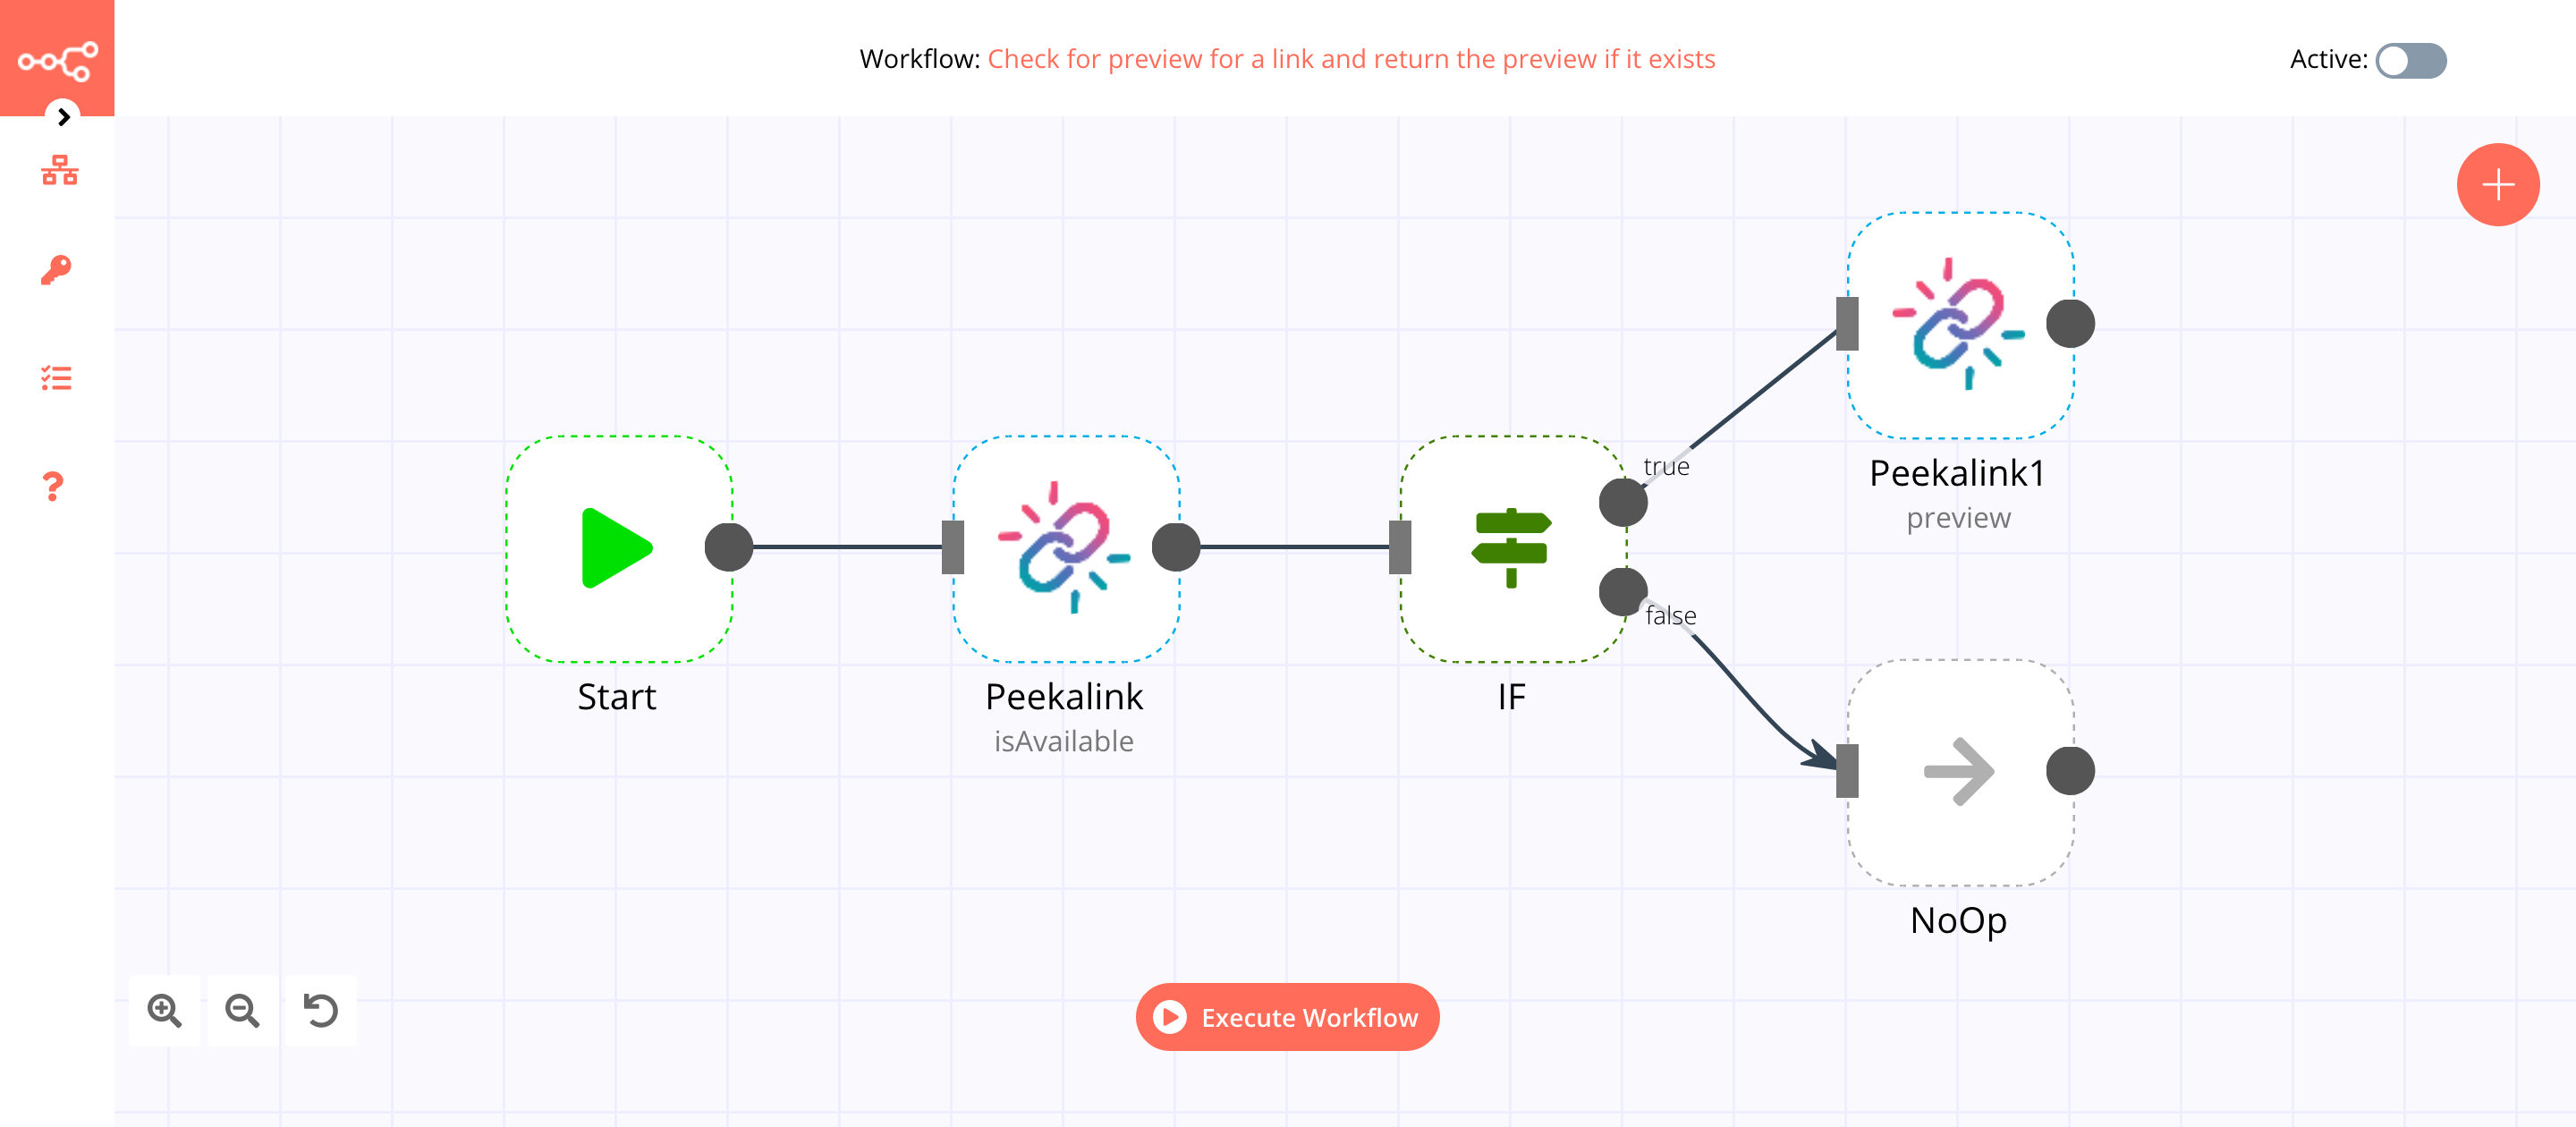 A workflow with the Peekalink node